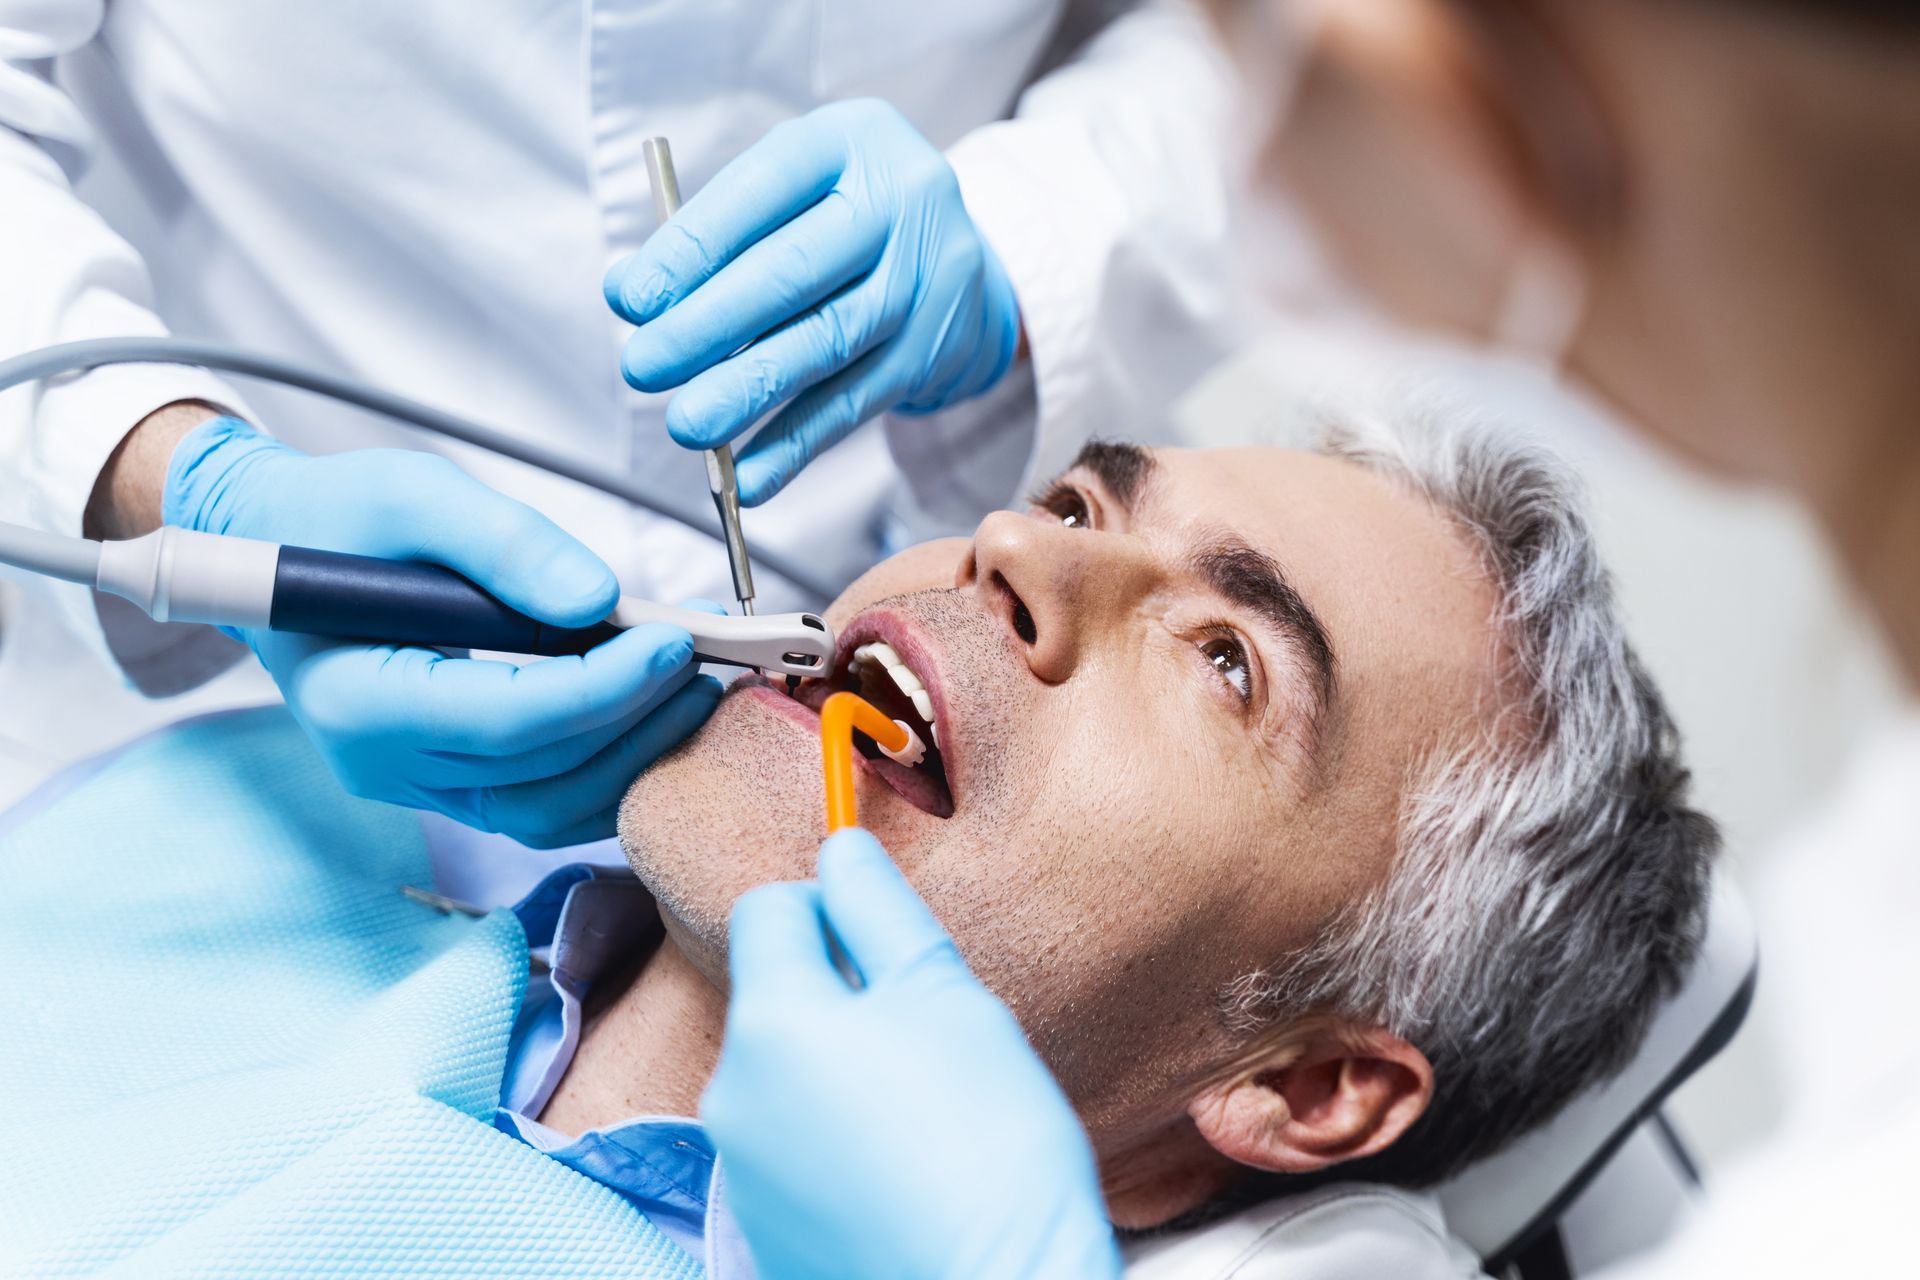 Man undergoing root canal treatment